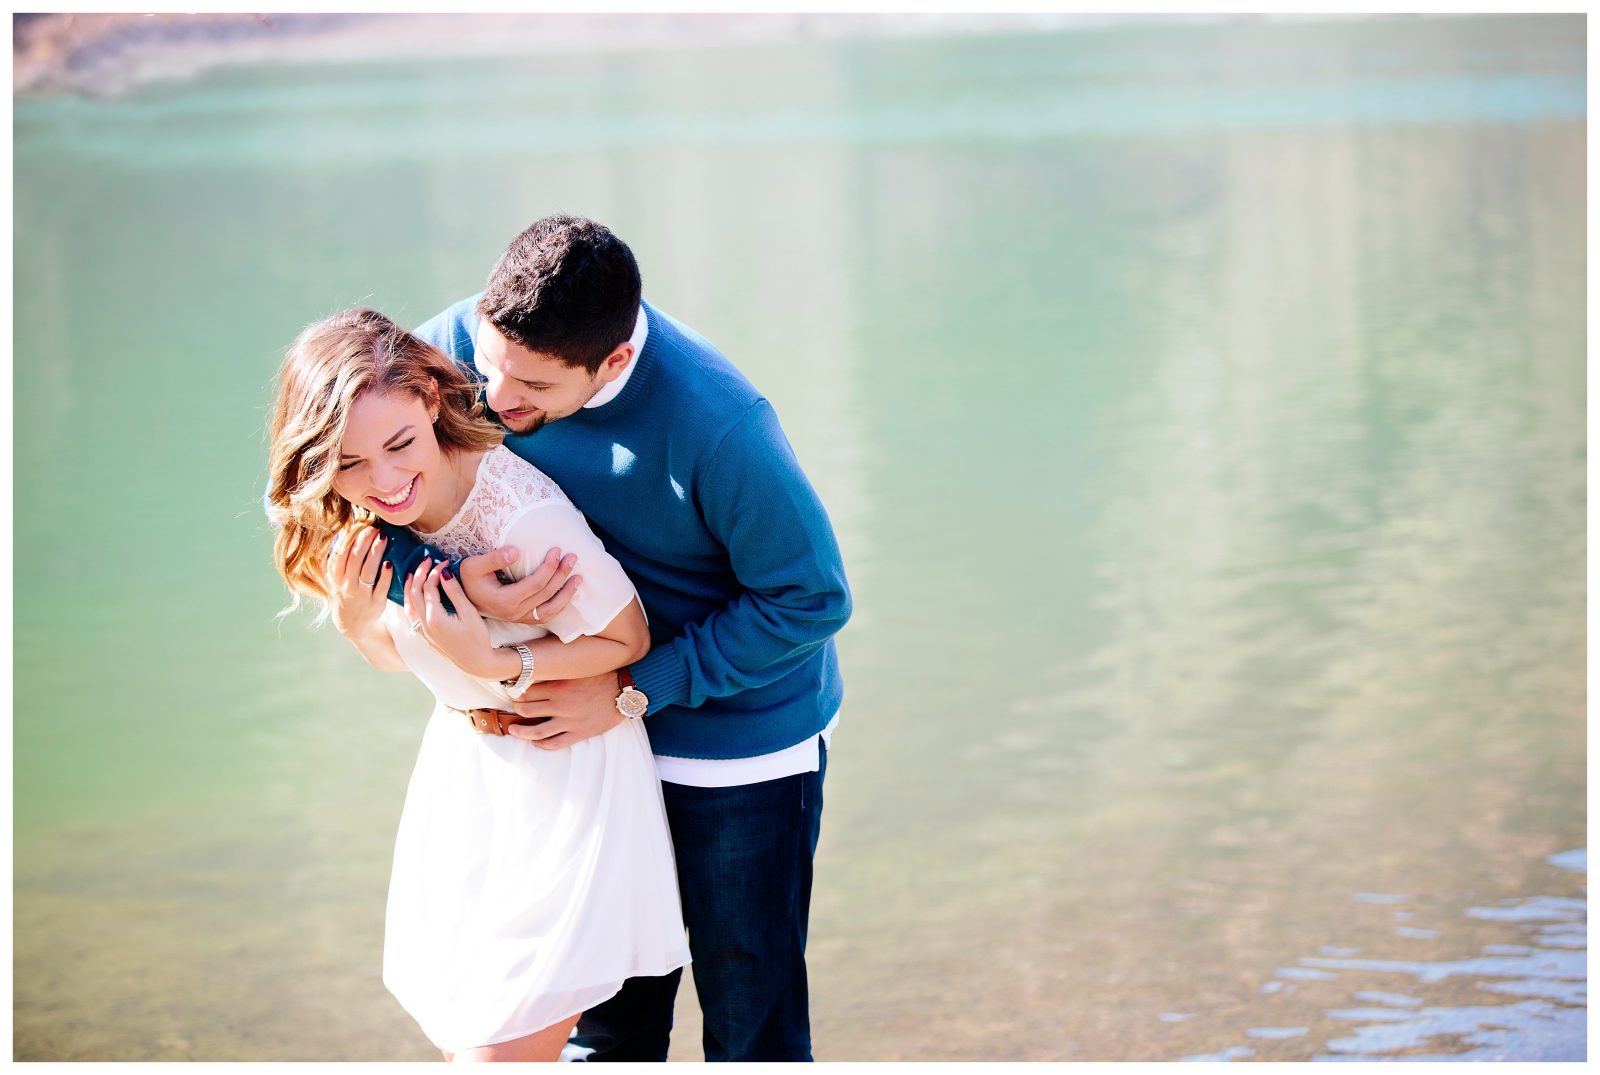 An Engagement Shoot: Hatta Mountains, featured on Bride Club ME